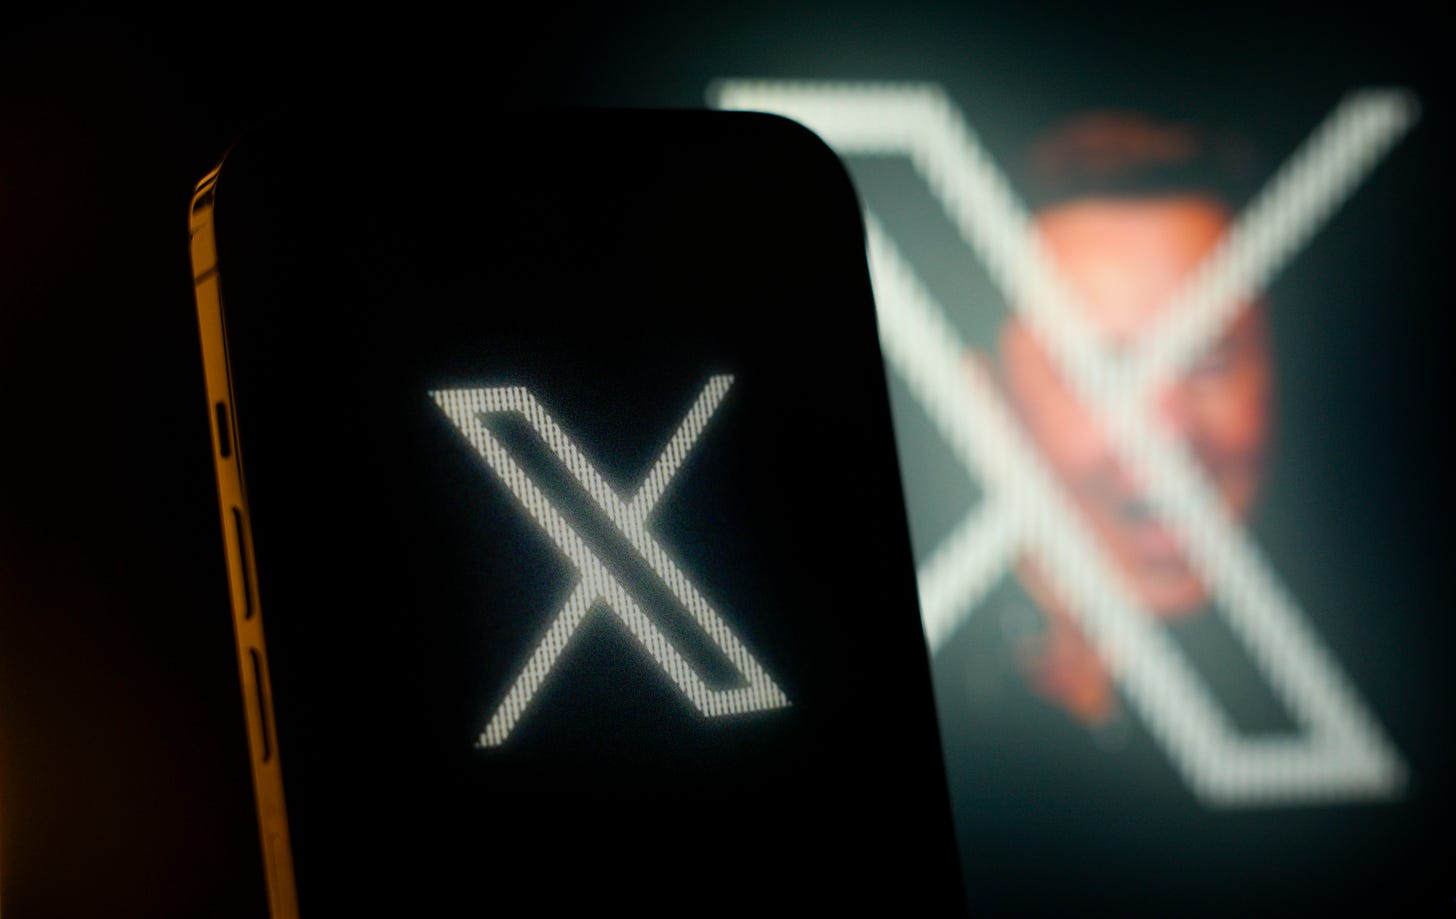 The X logo on the X app formerly known as Twitter is seen in this photo illustration on 01 November, 2023 in Warsaw, Poland. (Photo by Jaap Arriens/NurPhoto via Getty Images)